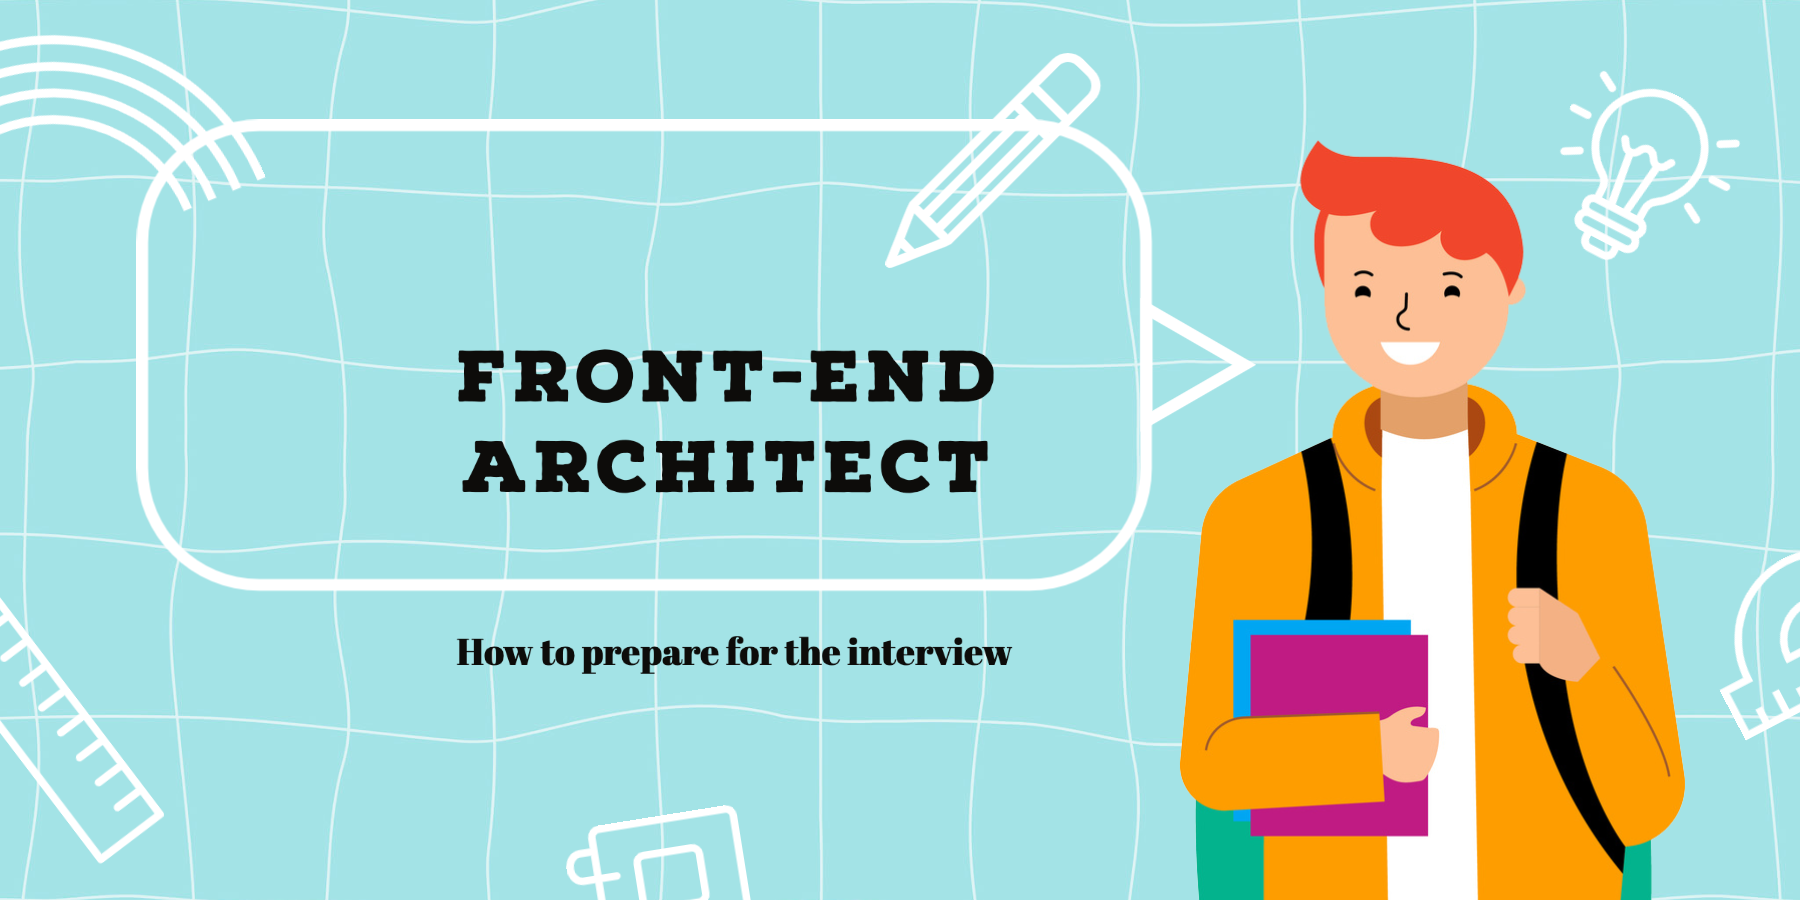 How to prepare for a front-end architect interview